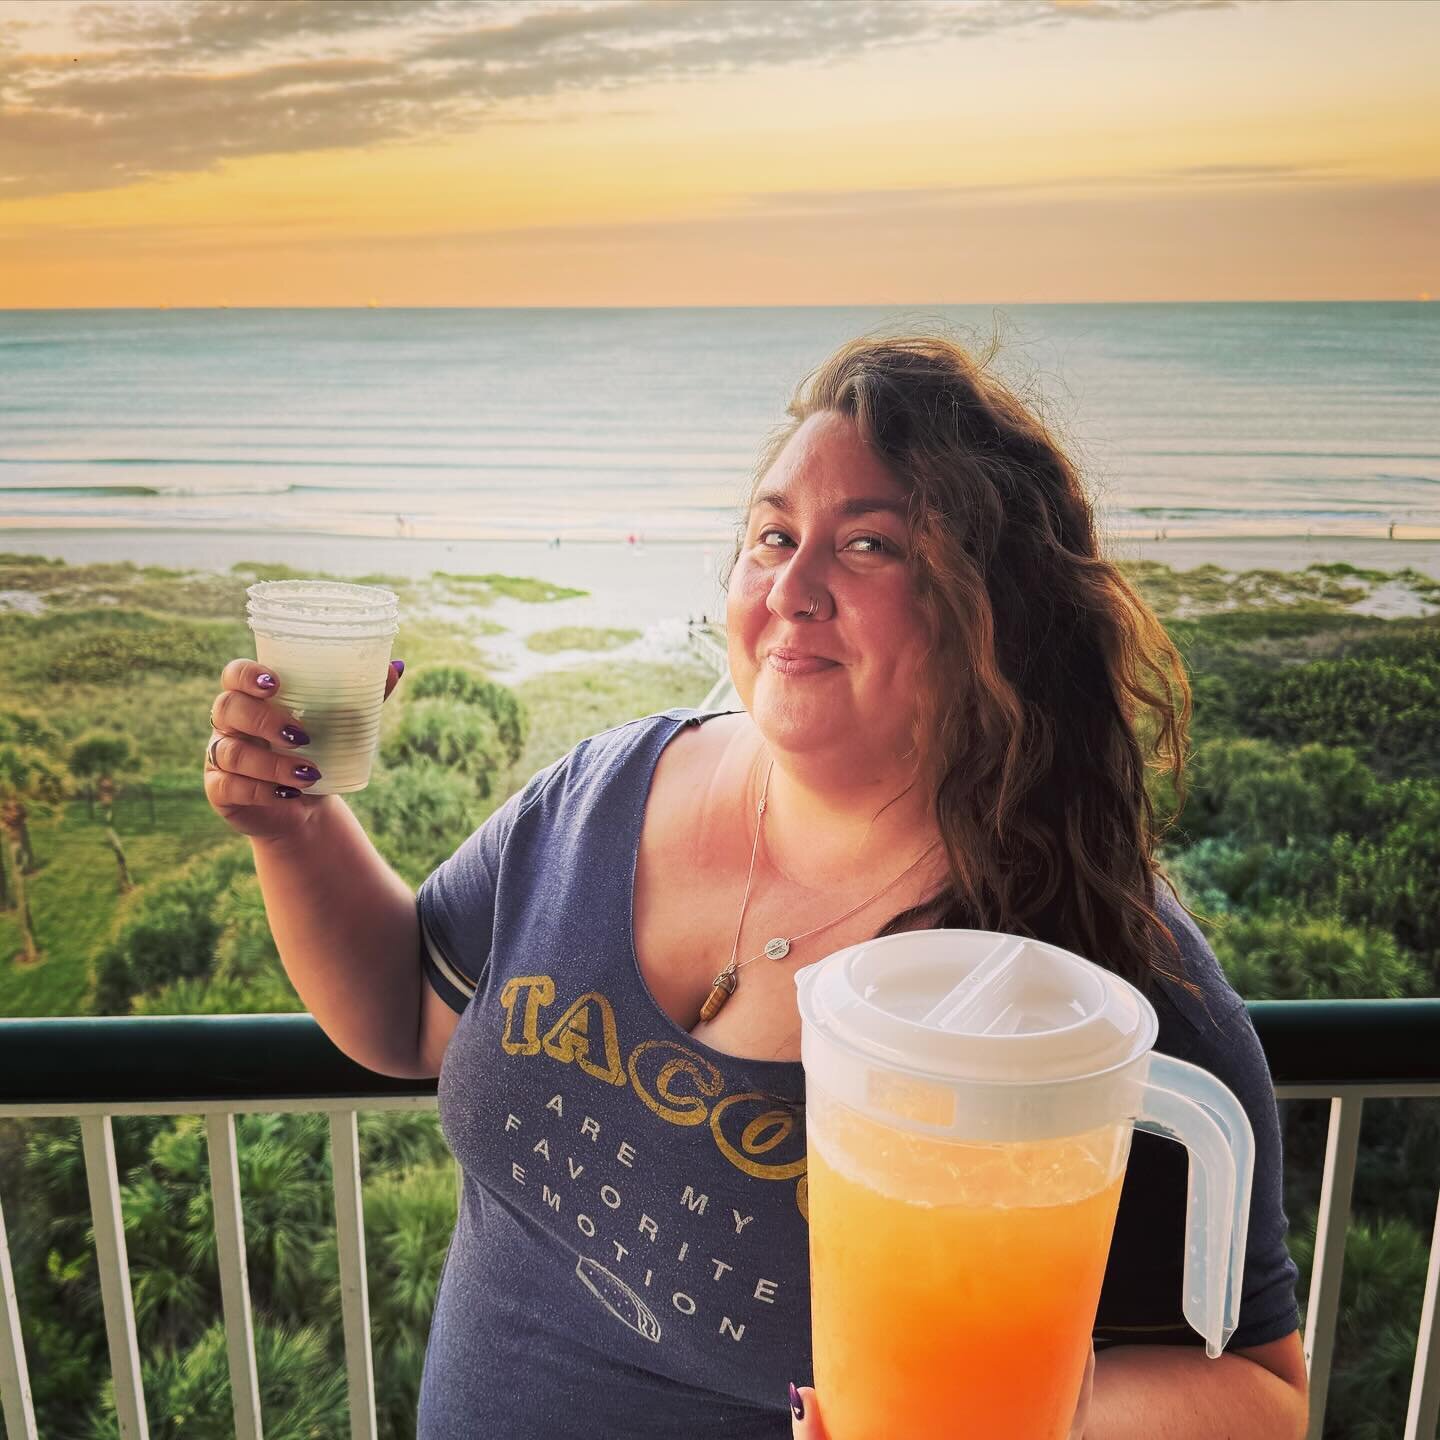 I&rsquo;ve got a pitcher of margaritas and an ocean sunset. I&rsquo;m on island time baby! #islandtime #cocoabeach #florida #floridawinter